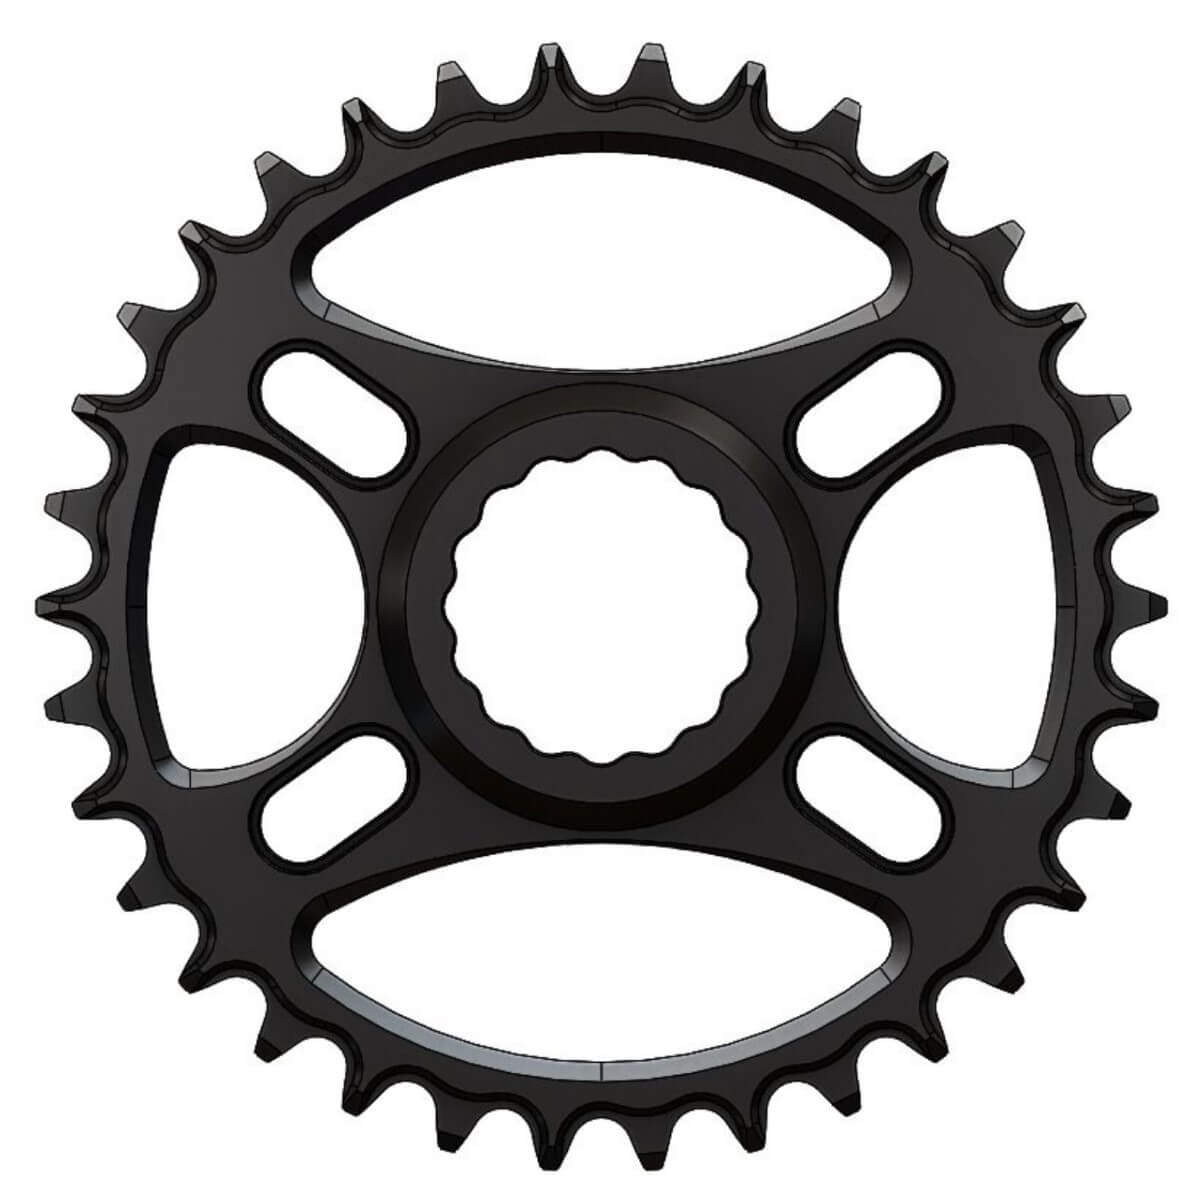 C41 Chainring Narrow Wide 28T for Race Face direct mount.